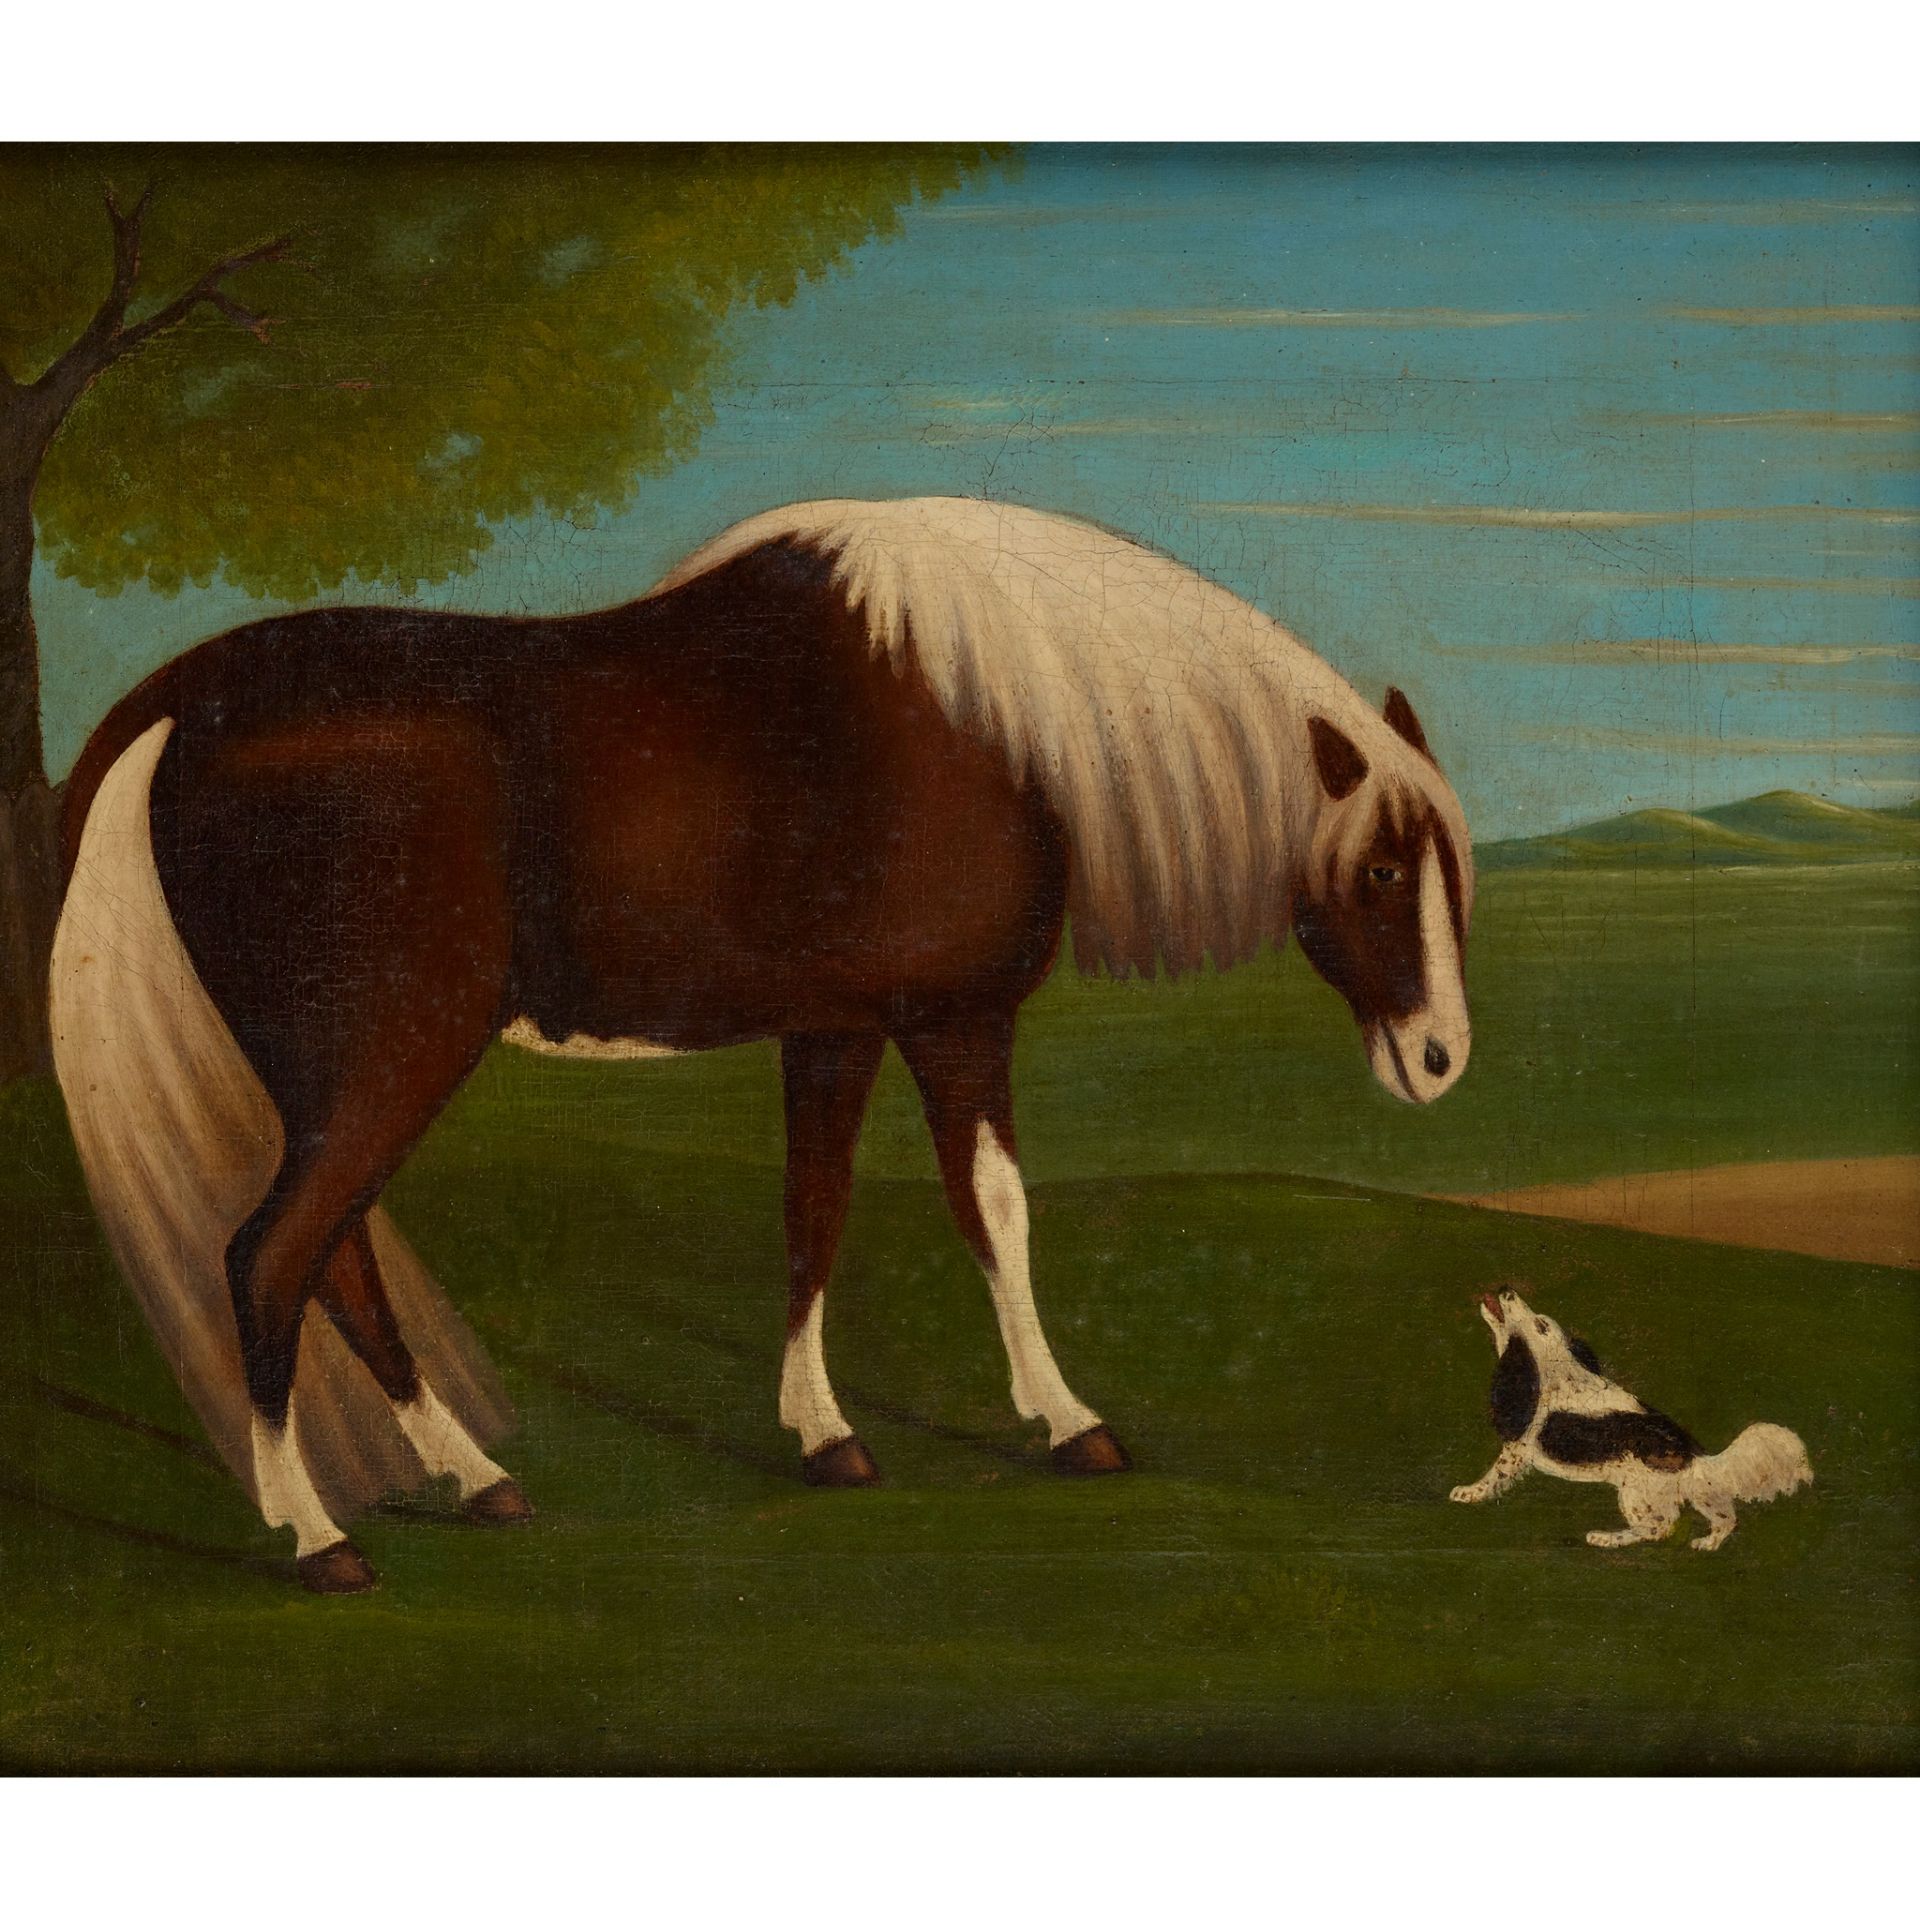 Y 19TH CENTURY ENGLISH SCHOOL NAIVE PAINTING OF A HORSE AND SPANIEL - Image 2 of 3